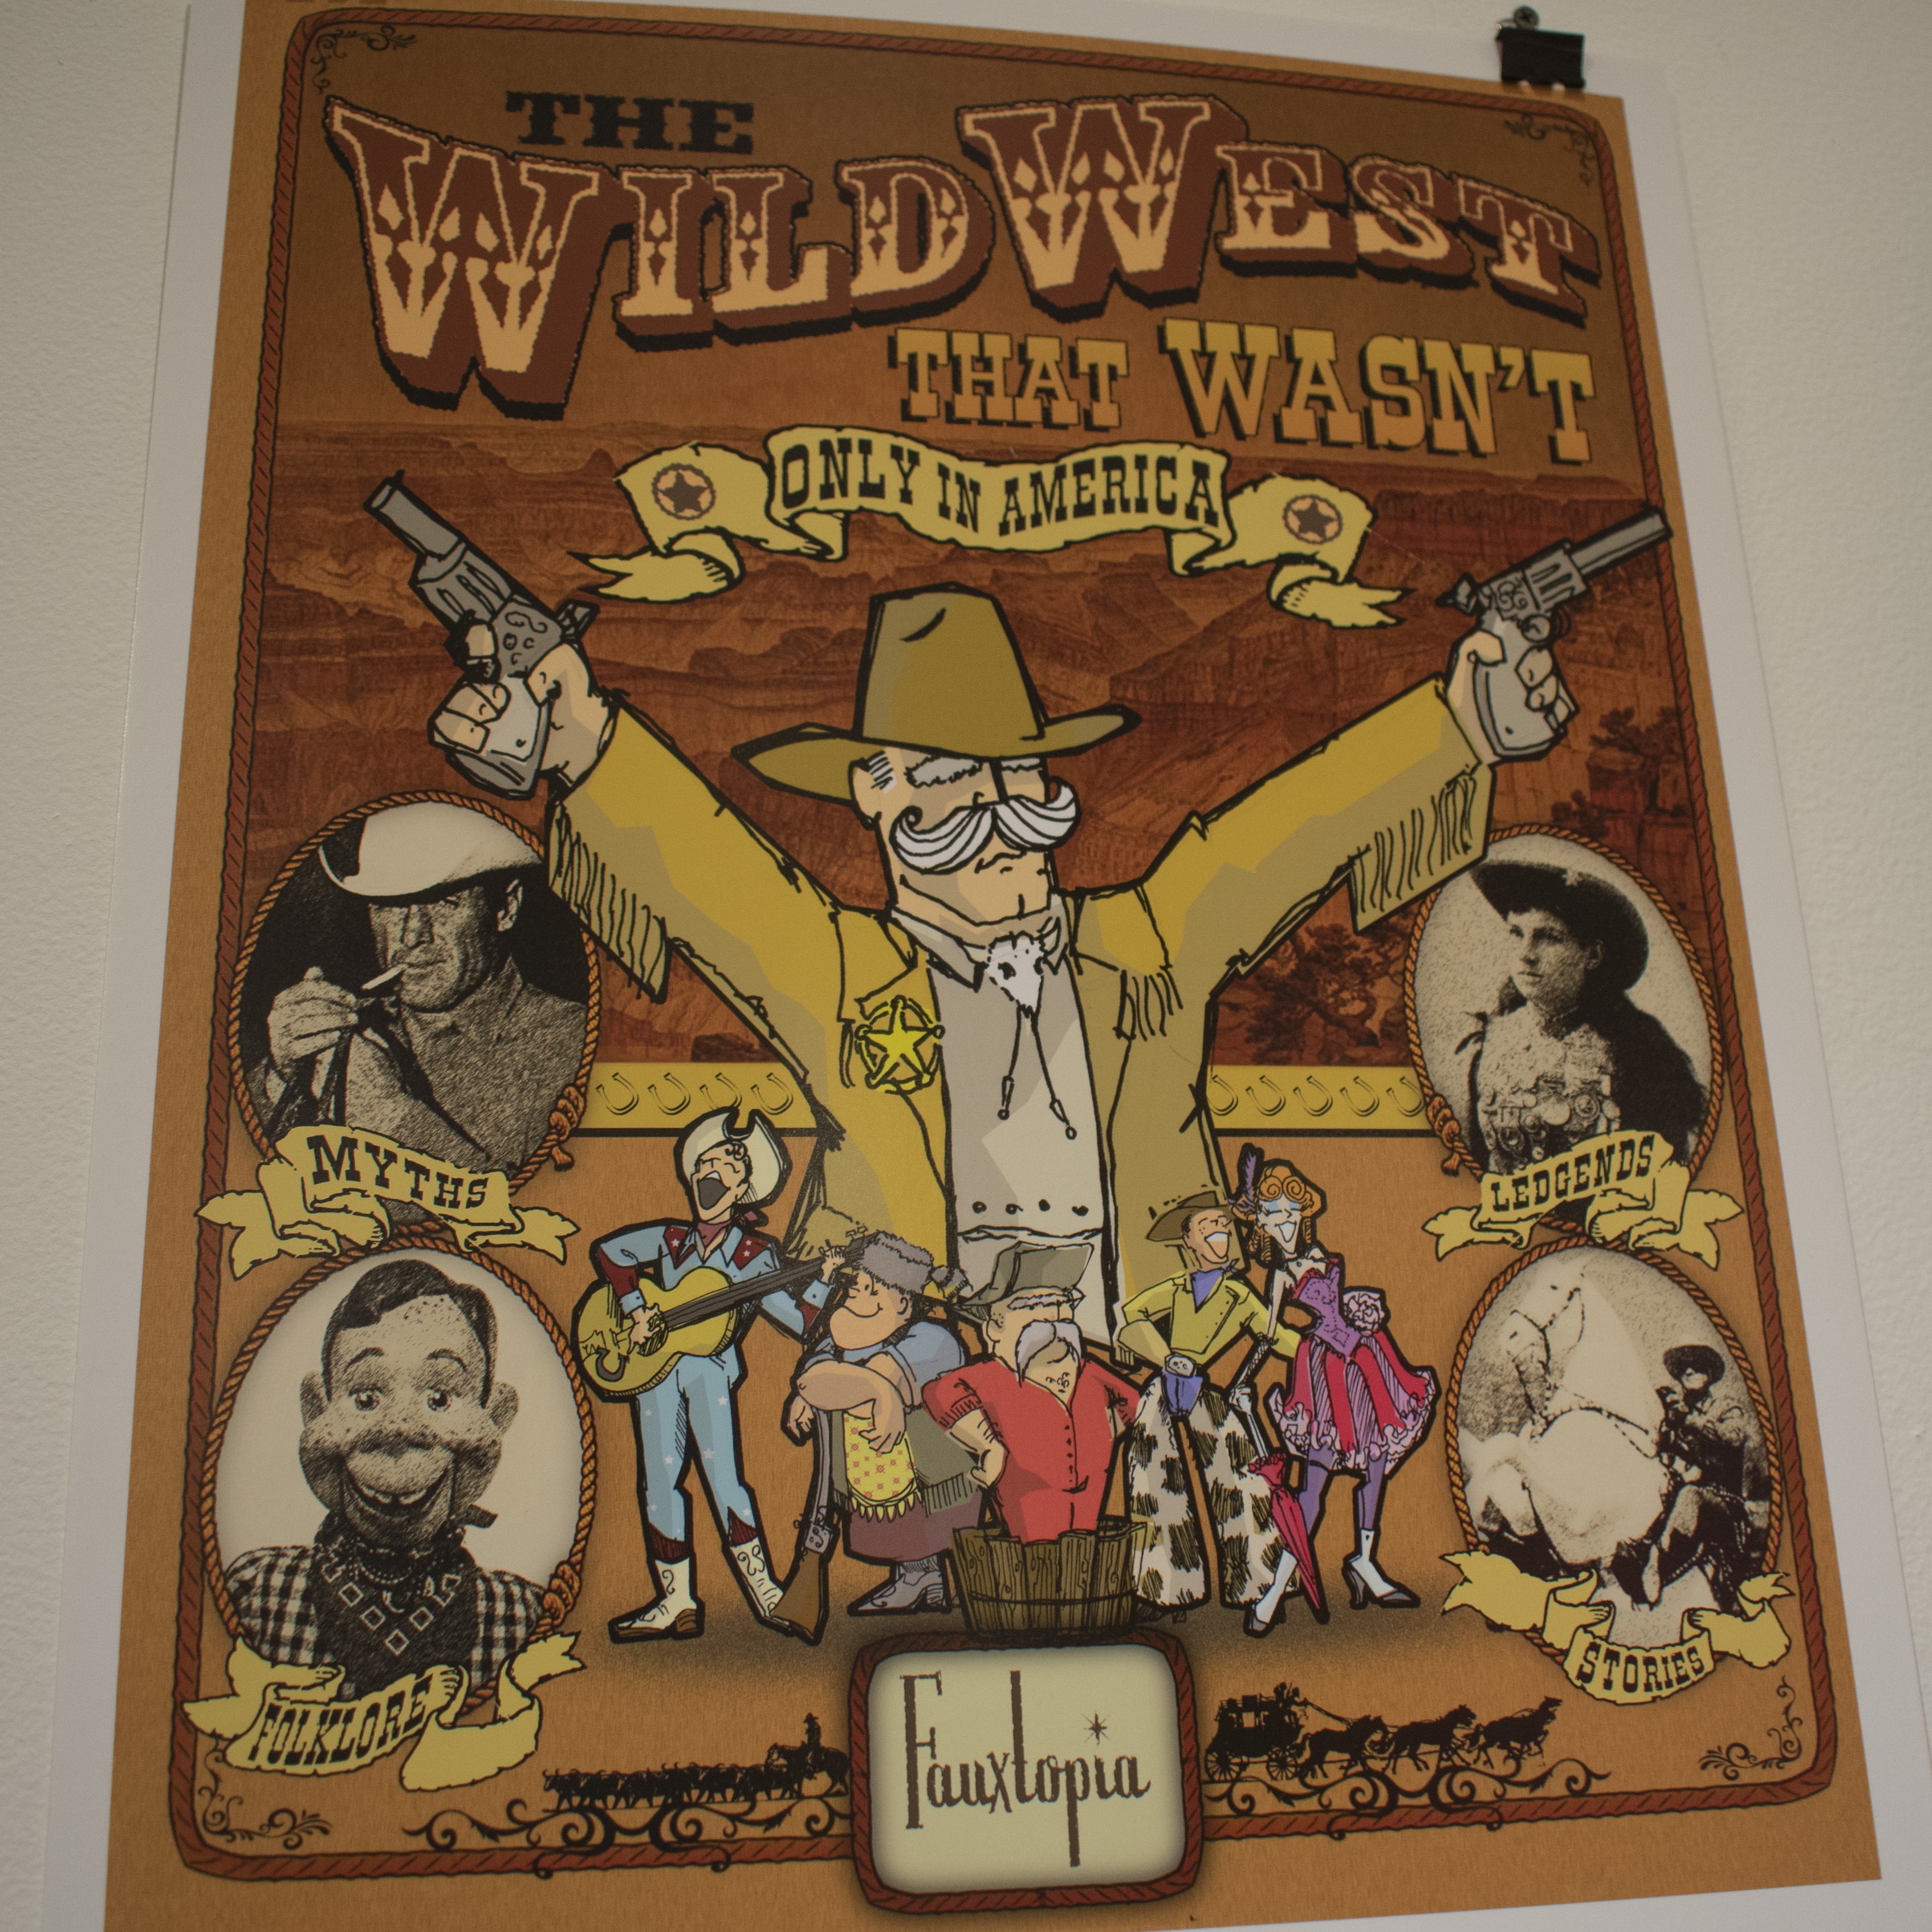 Western themed poster with multiple images of famous western figures and text "The Wild West that Wasnt: only in America"